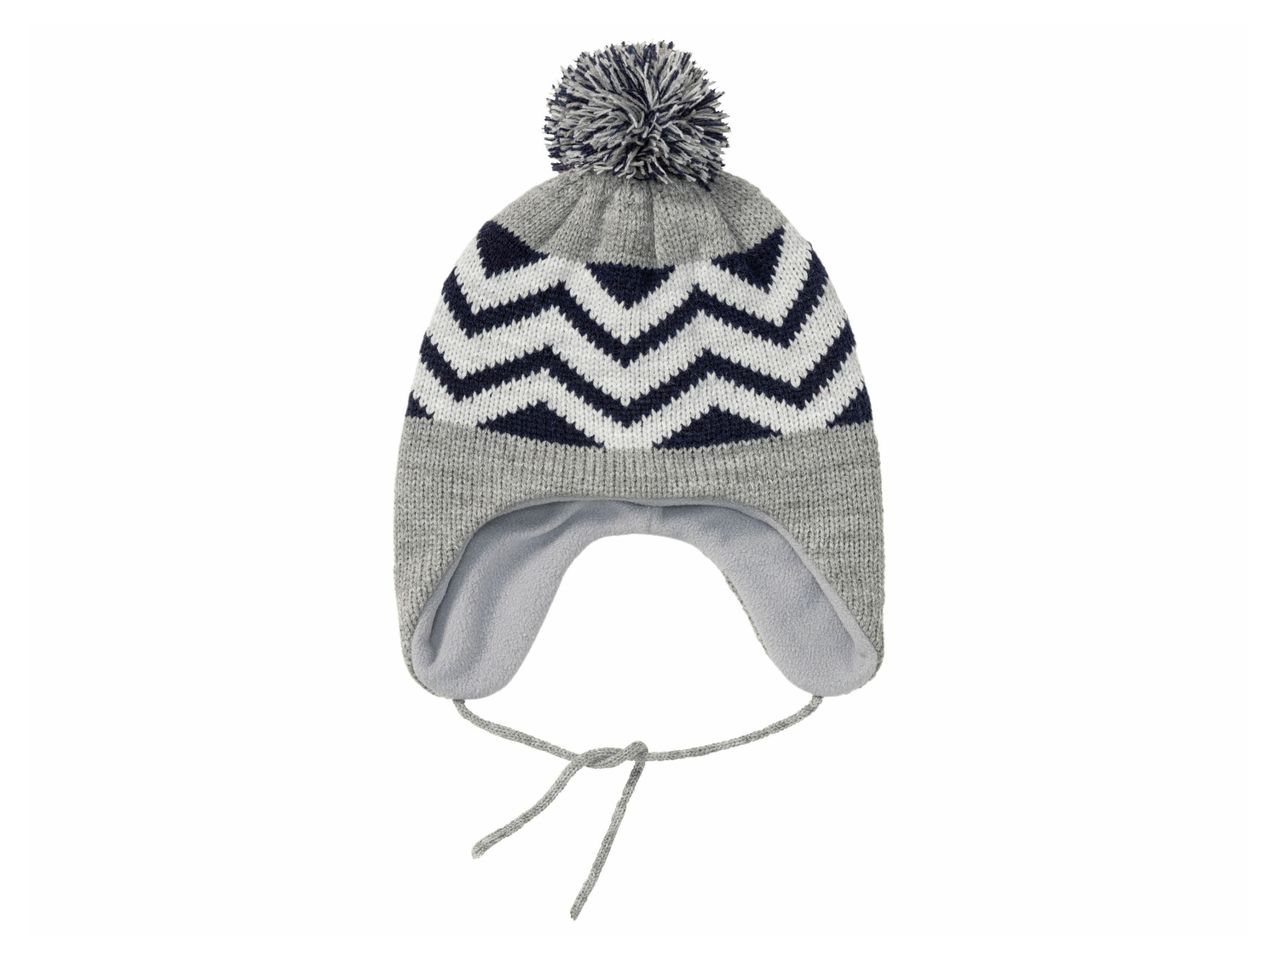 Go to full screen view: Kids' Knitted Hat - Image 2